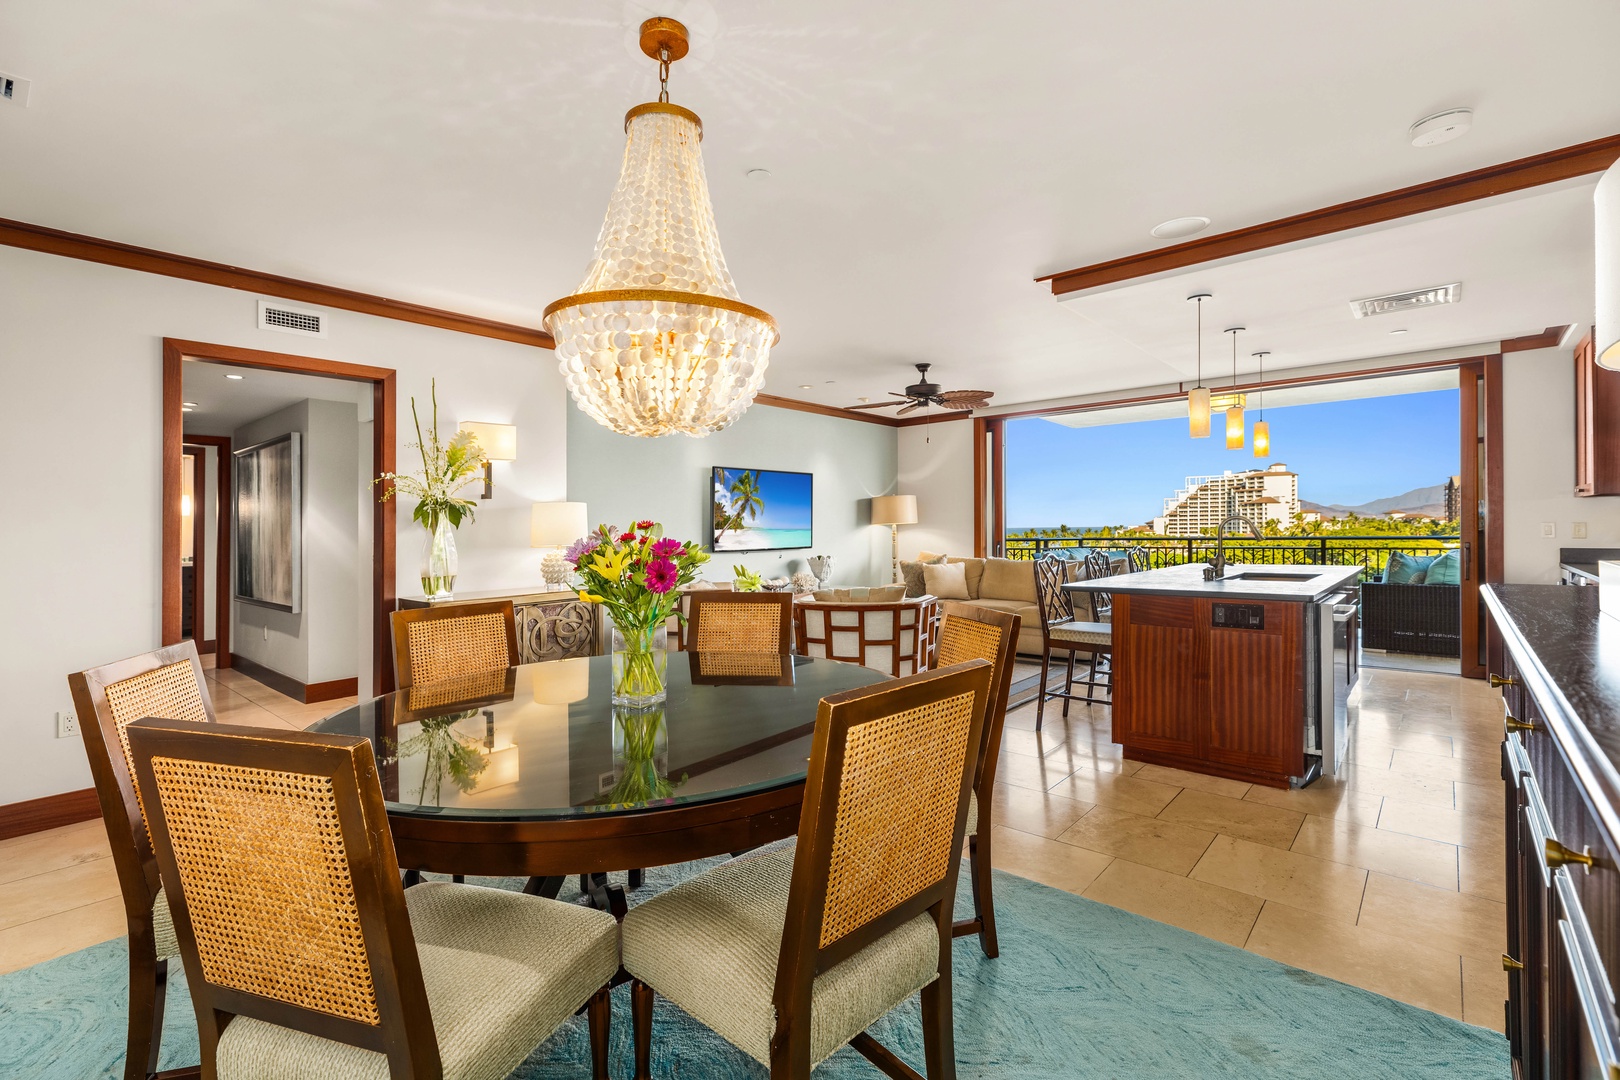 Kapolei Vacation Rentals, Ko Olina Beach Villa B604 - Elegant dining area for your group with views to the ocean.